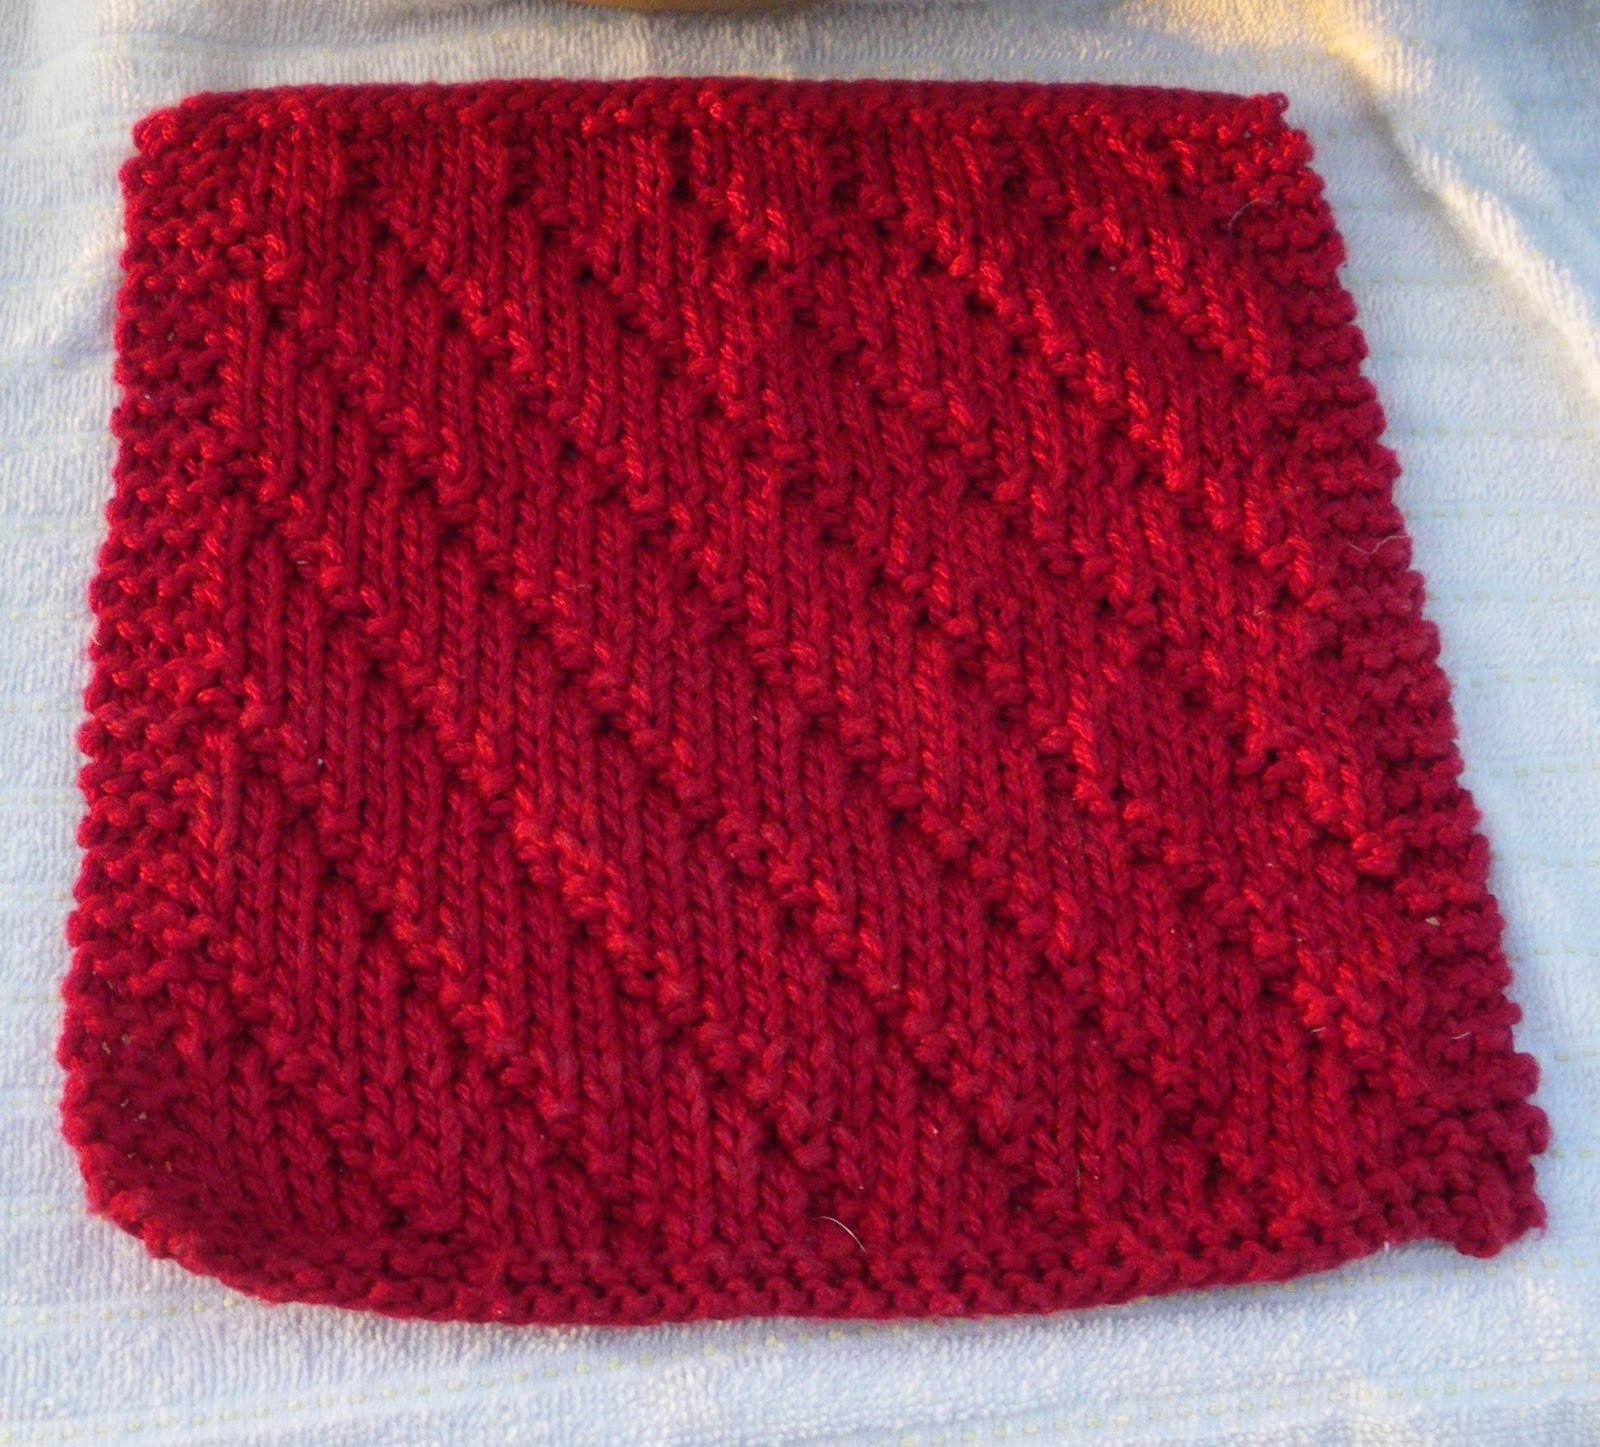 Monthly Dishcloth Overflow: KAL January 1st - FINAL